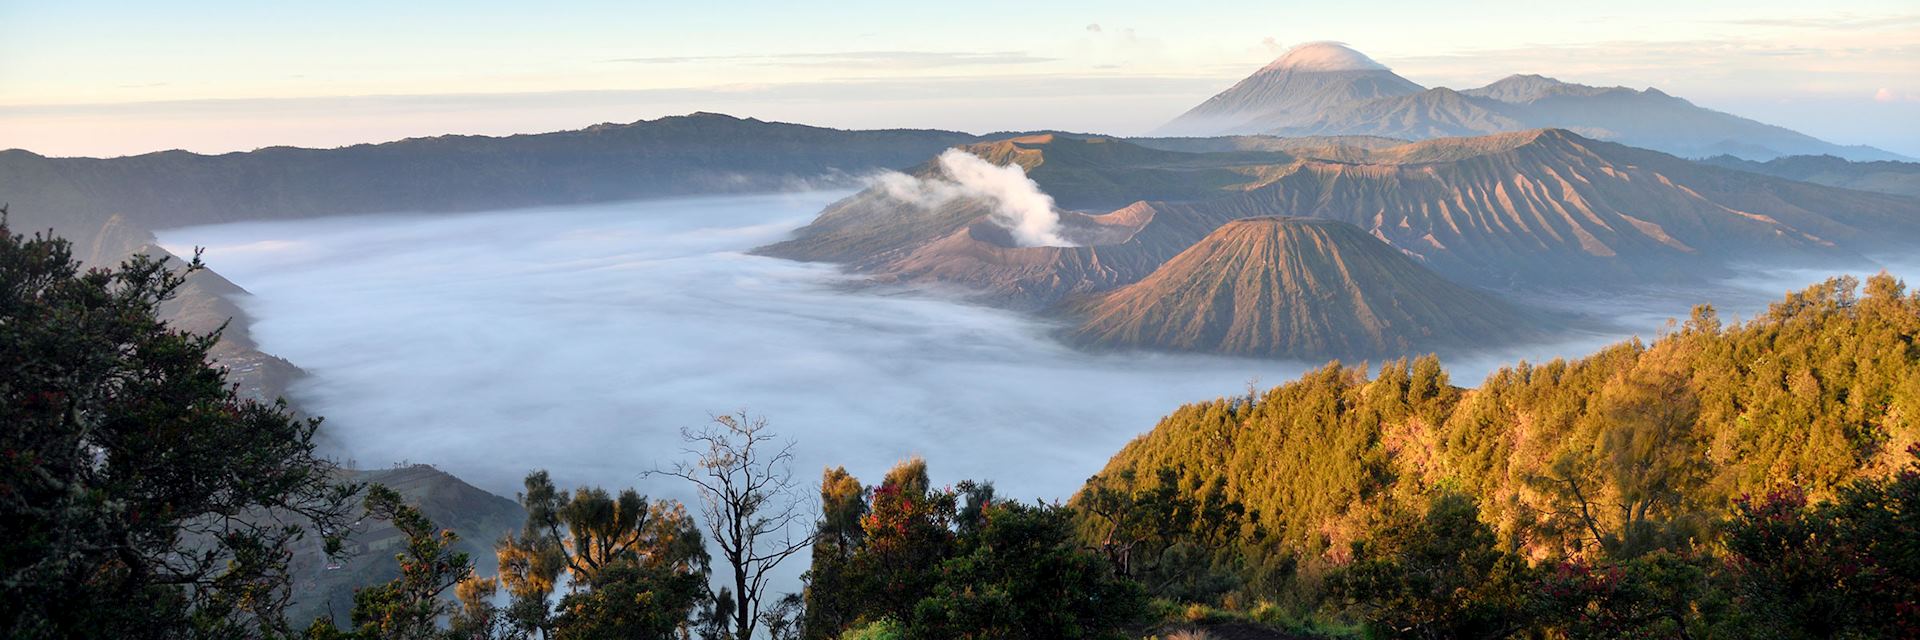 Visit Java, Indonesia   Tailor Made Java Trips   Audley Travel